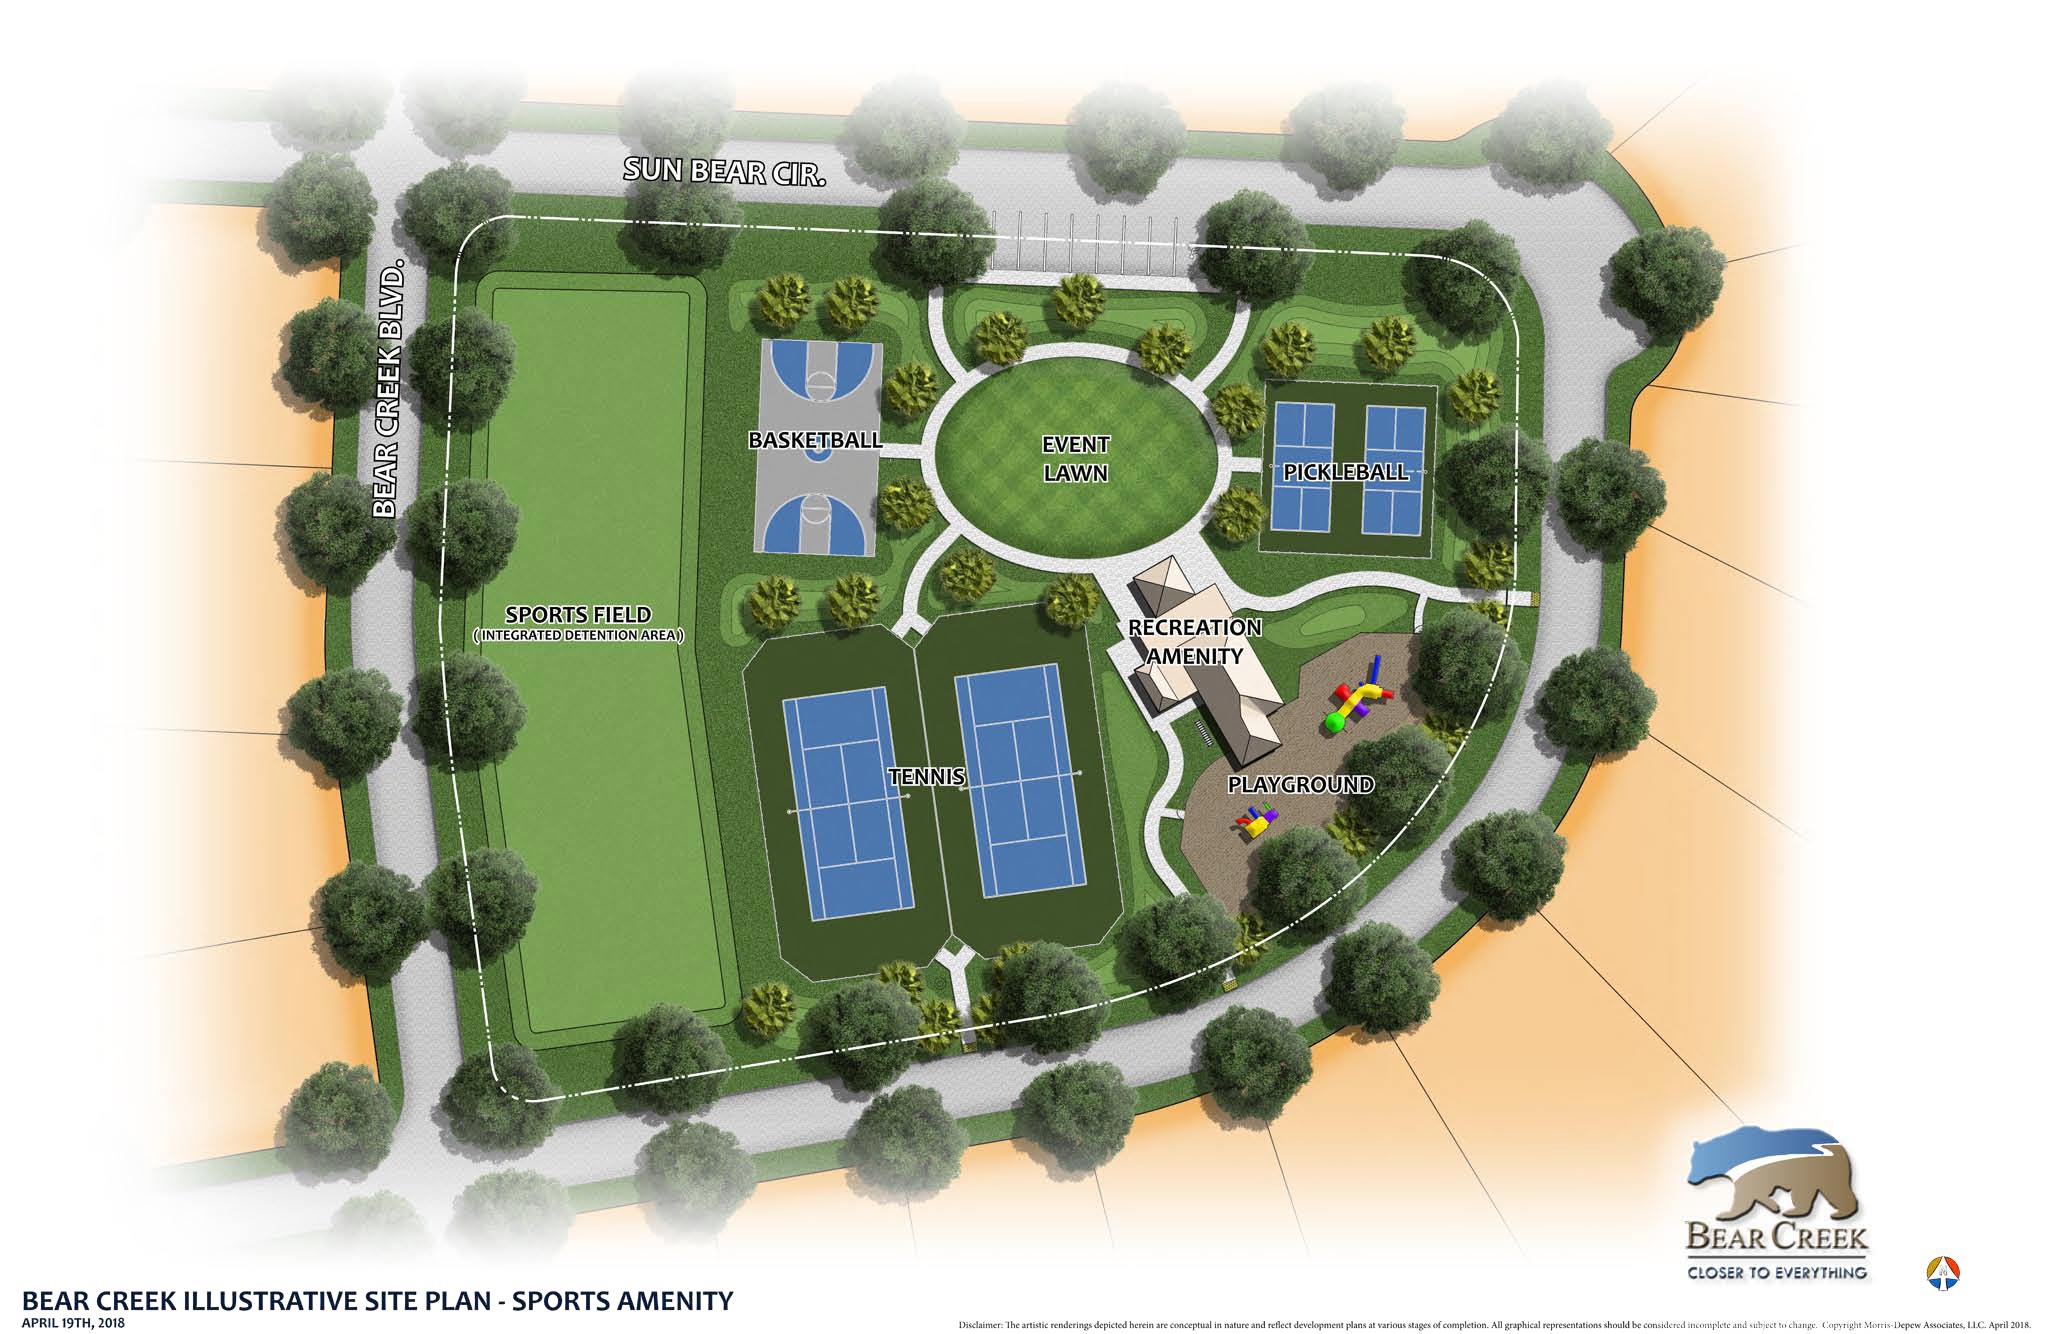 Photo of the Bear Creek Site Plan, showing sports amenities